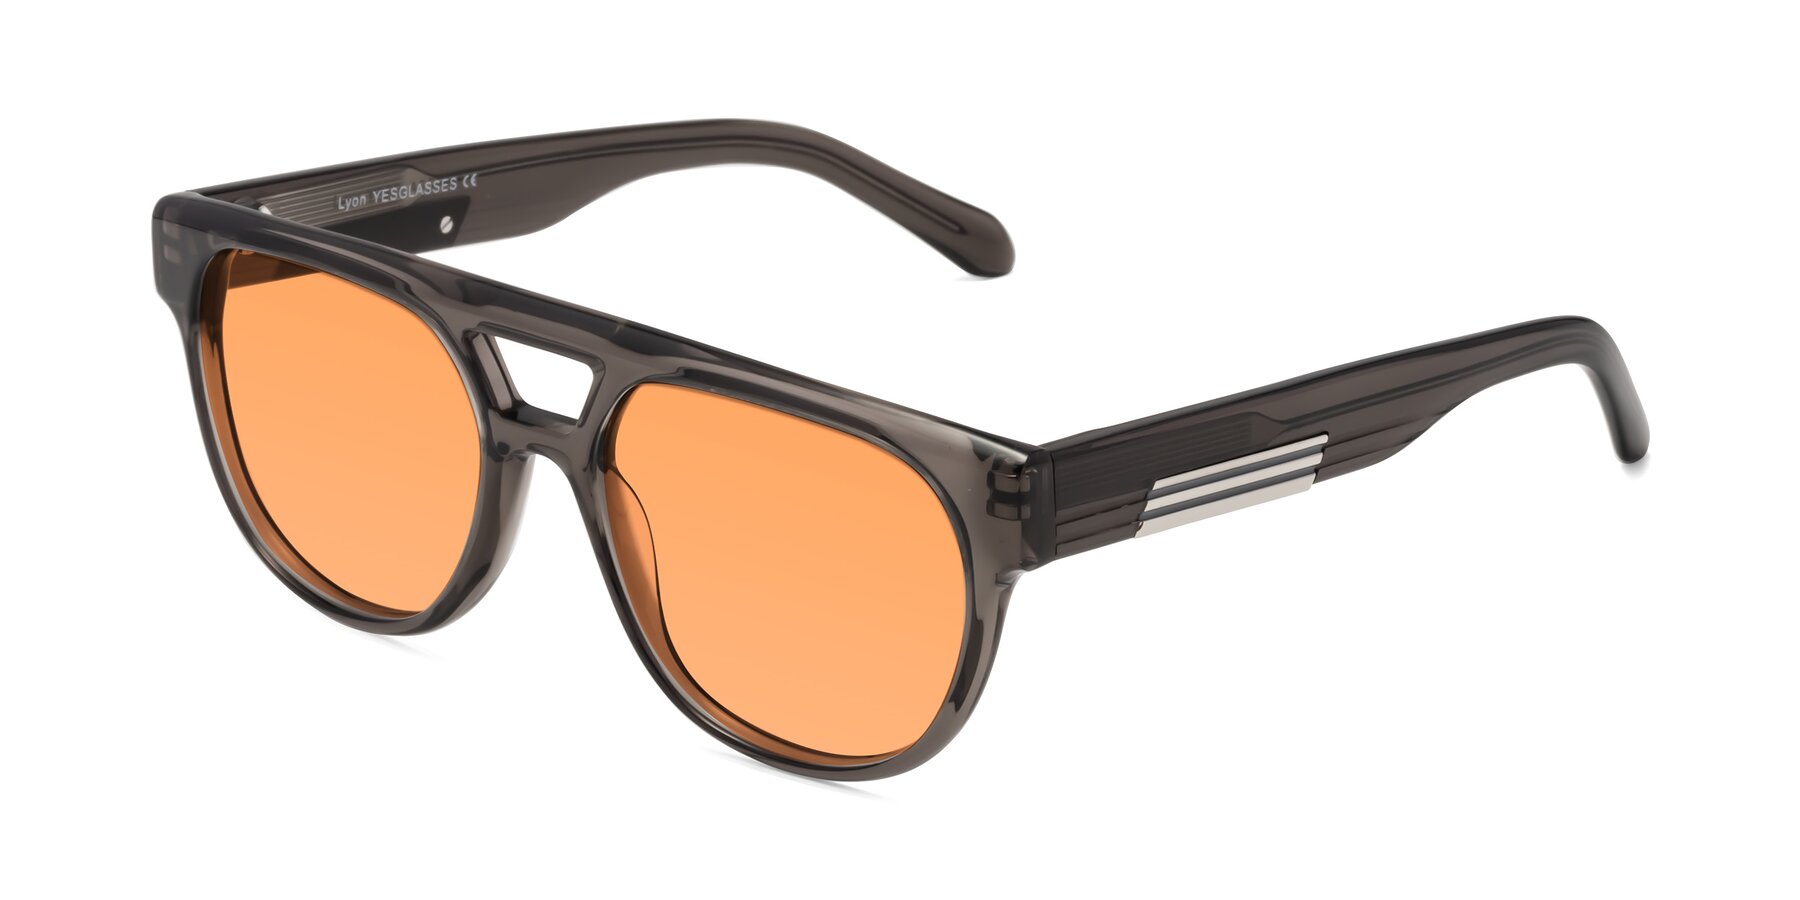 Angle of Lyon in Charcoal Gray with Medium Orange Tinted Lenses